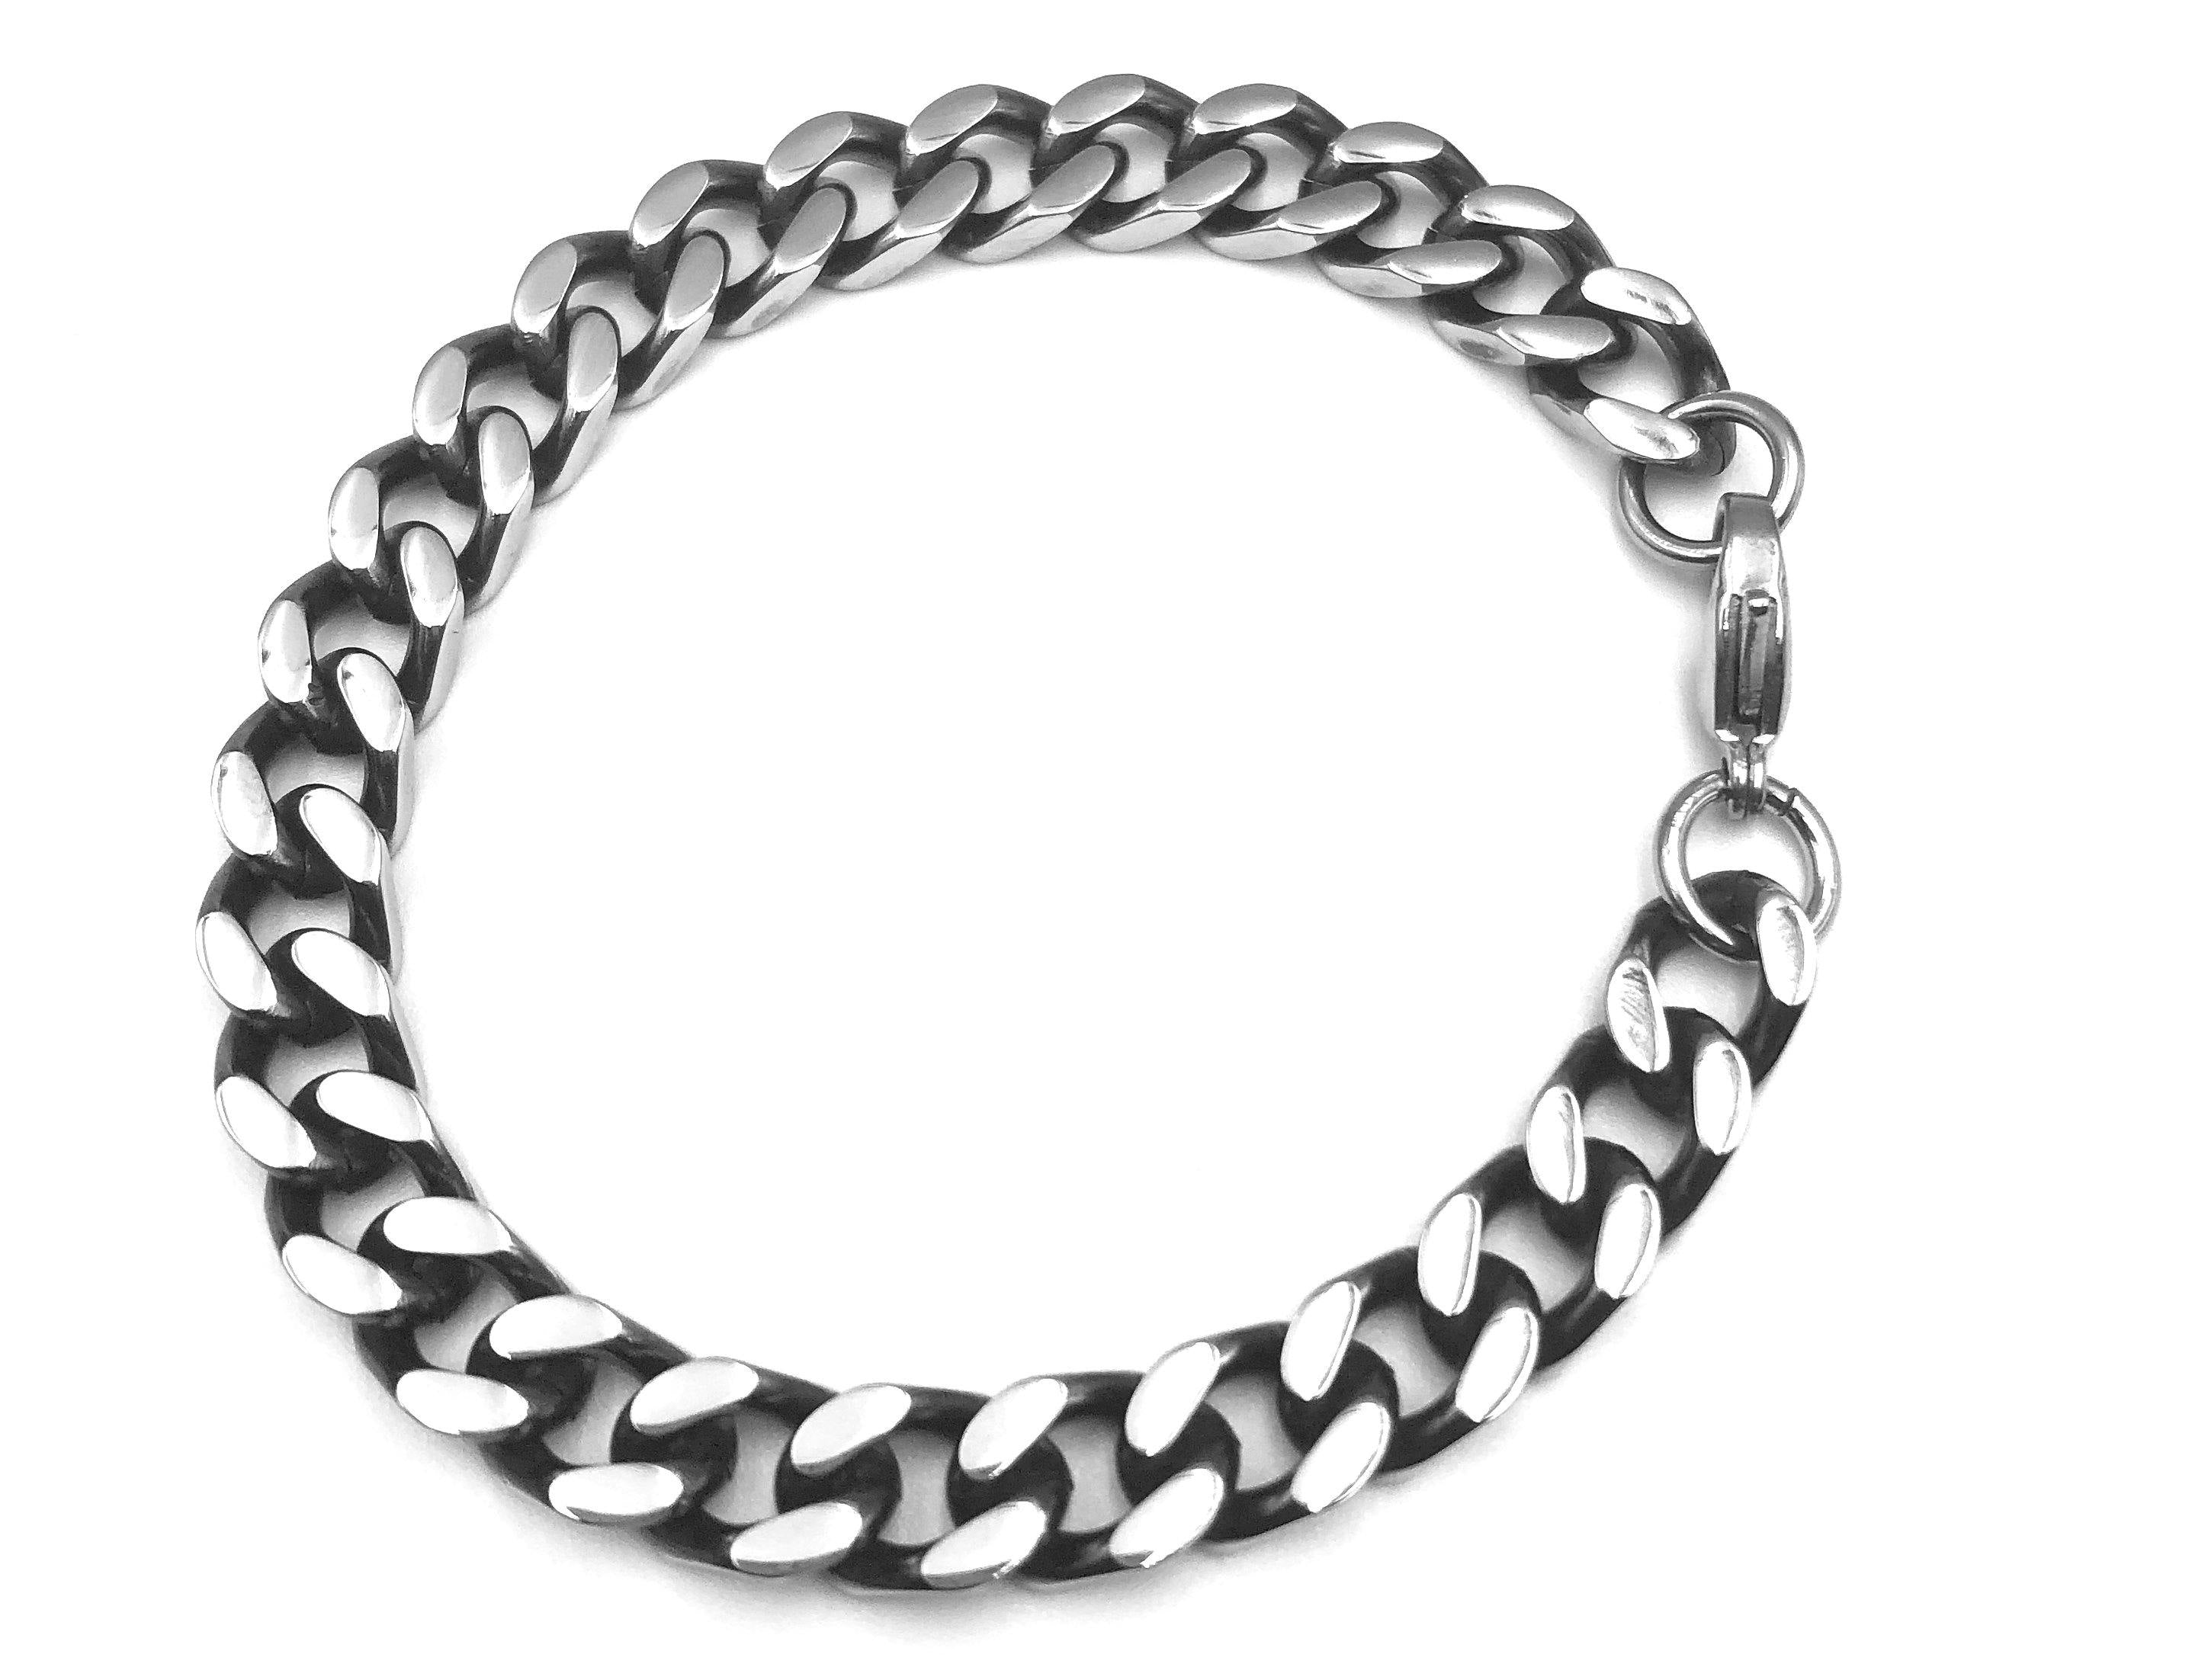 Matte Silver Chain Bracelet Matte Stainless Steel Curb Chain 